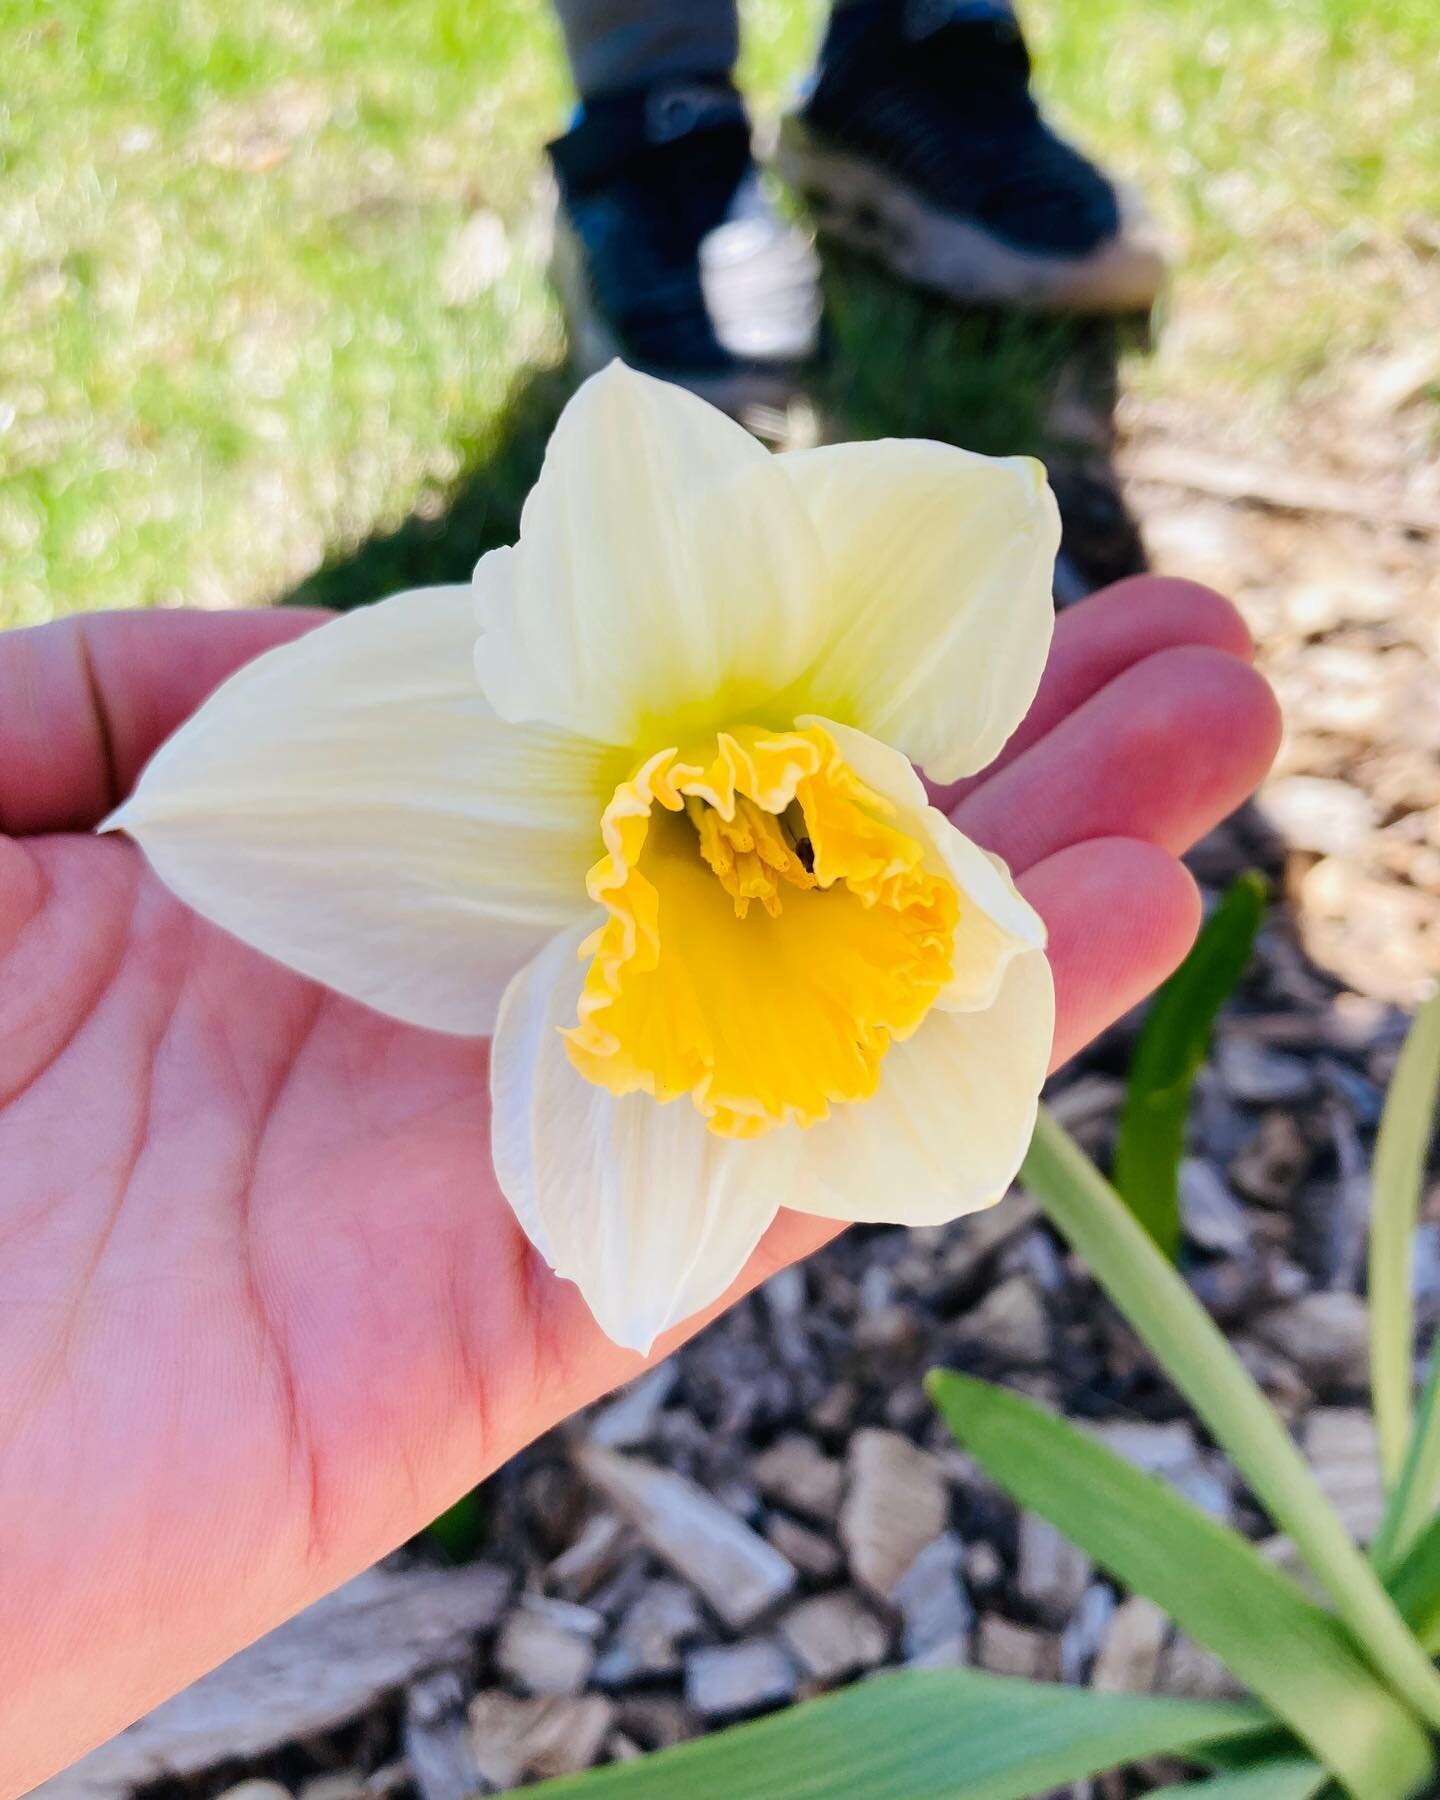 &ldquo;Hey, can you stand between the sun and this flower so I can take a better picture?&rdquo; First flower this season in my yard on this beautiful sunny day. My younger one tried to shield it from the wind, but I explained it can tolerate the win